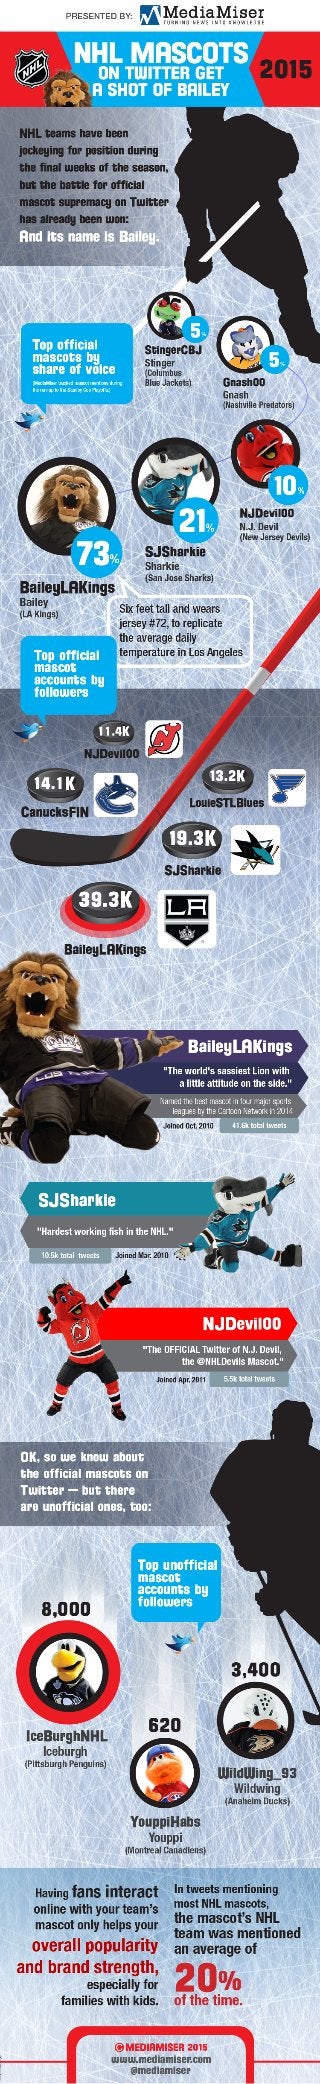 NHL mascots on Twitter get a shot of Bailey